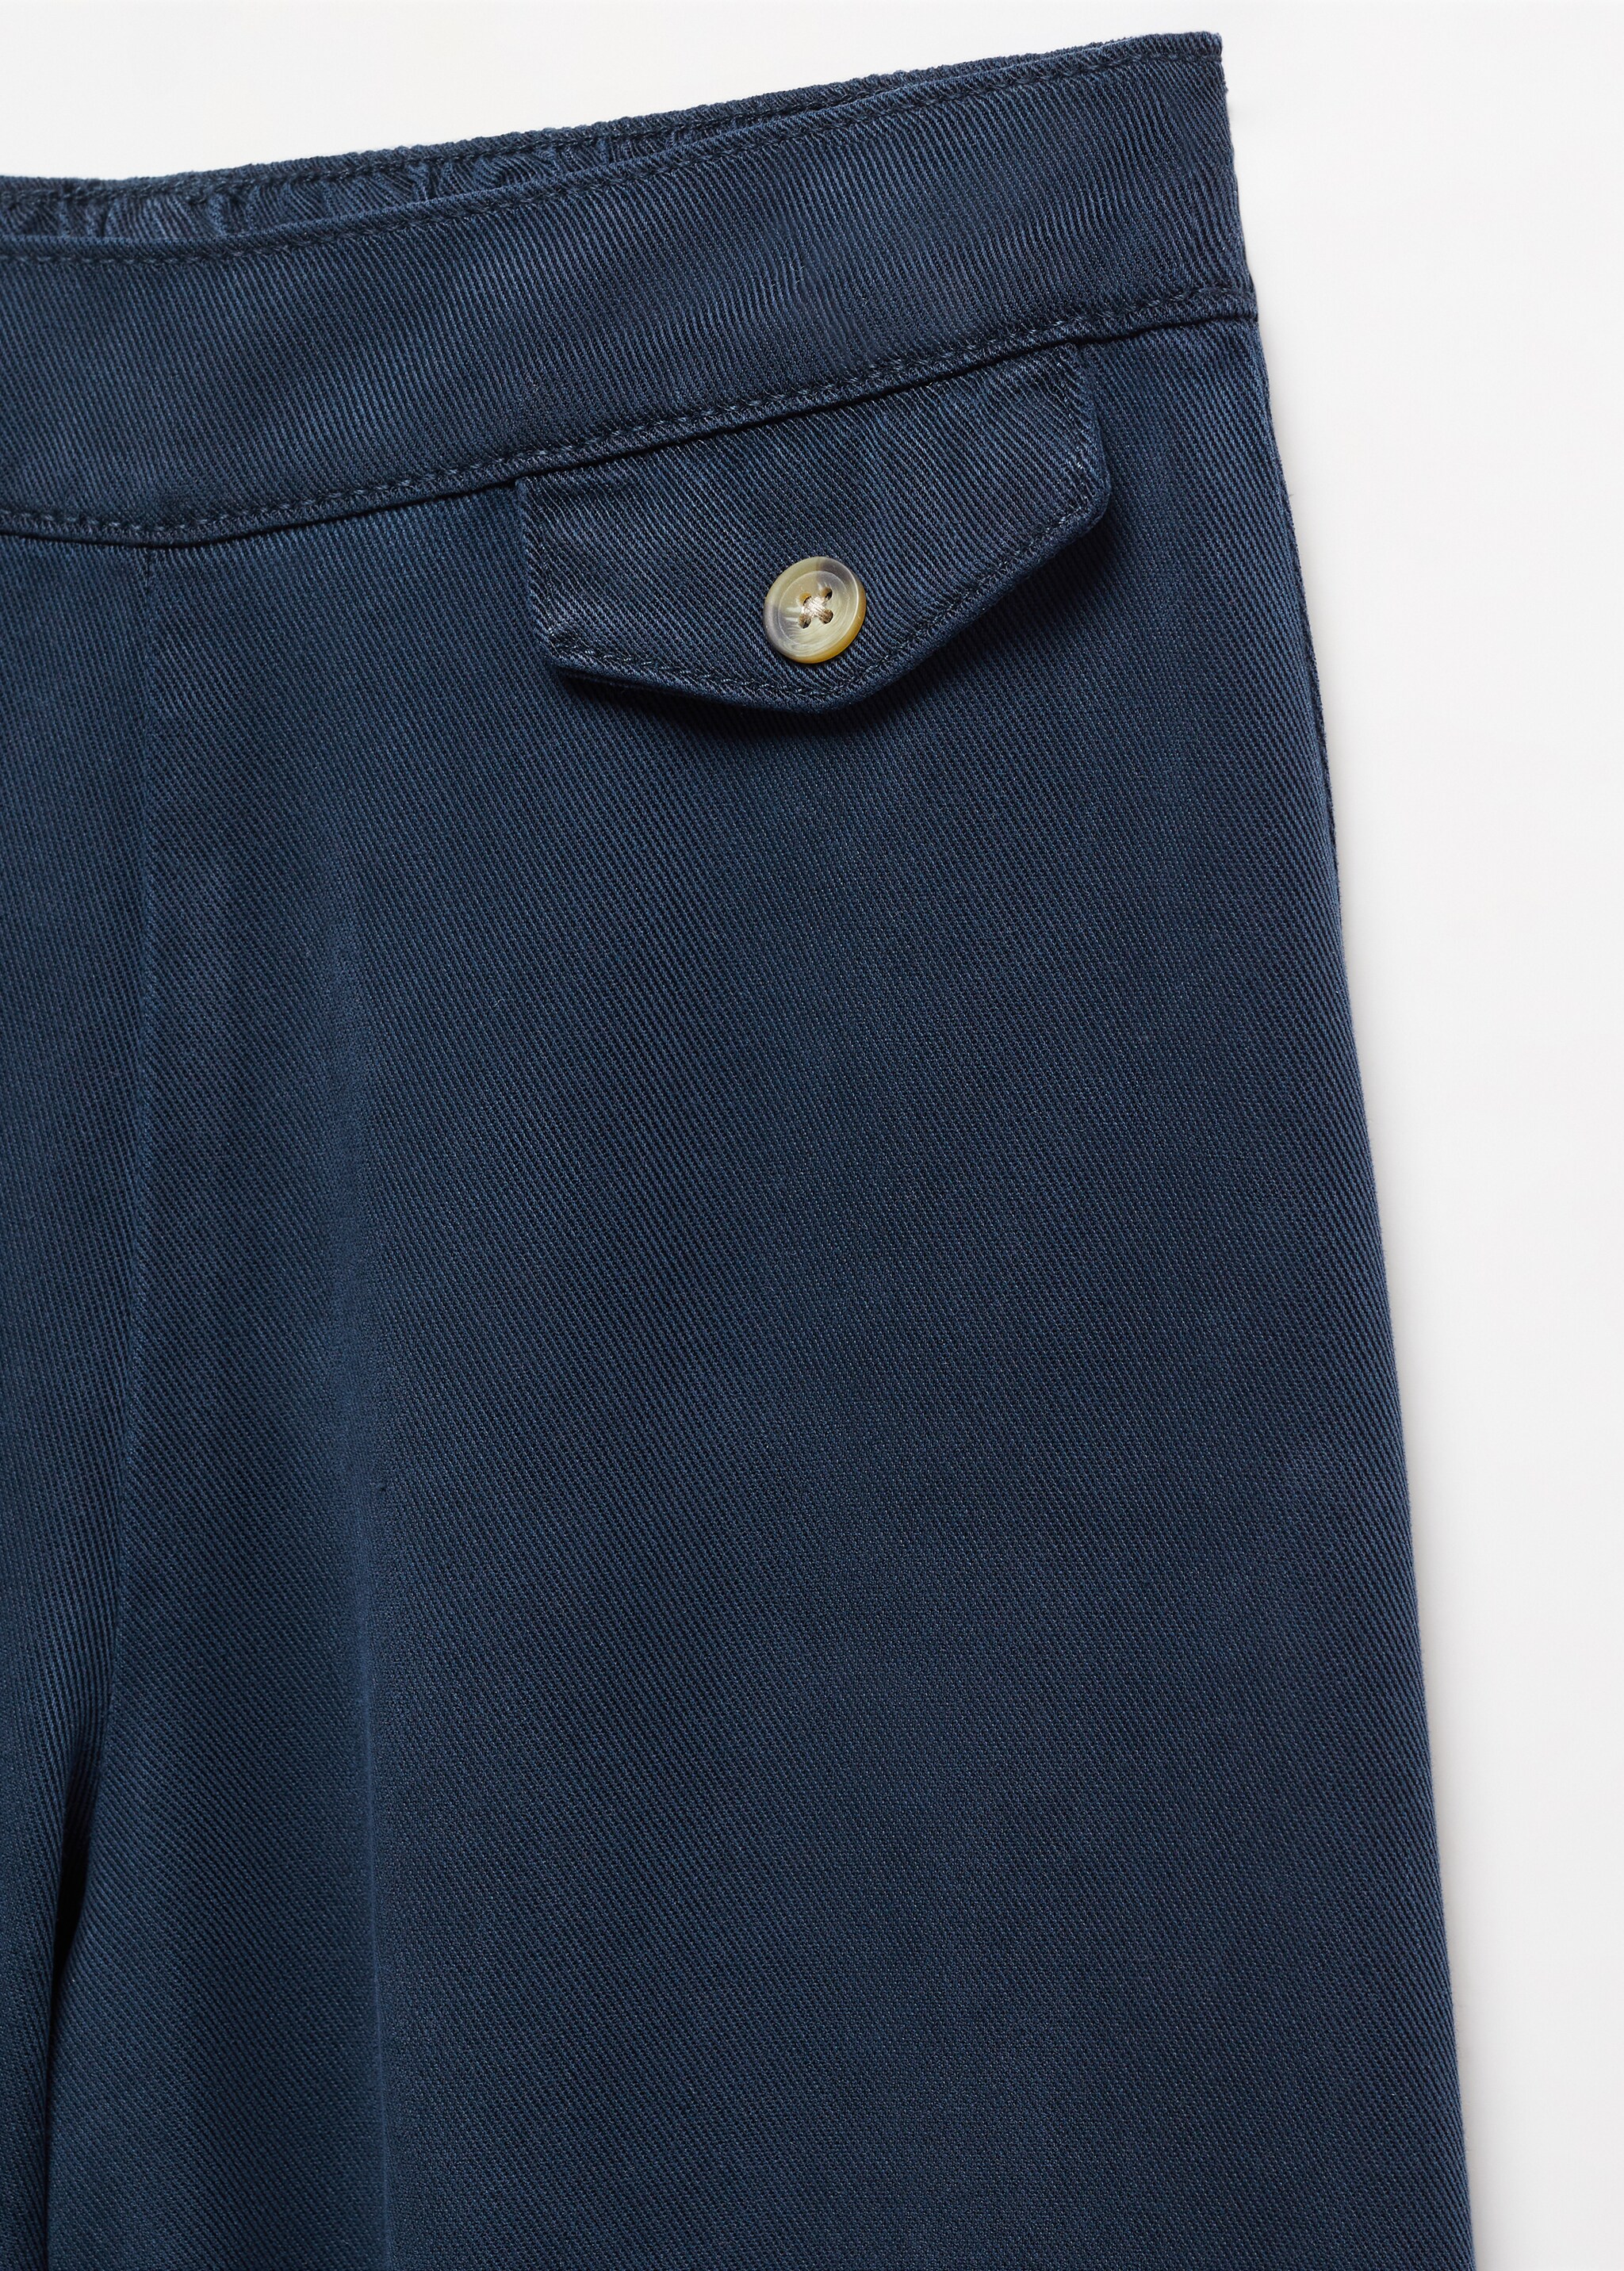 Buttons culottes trousers - Details of the article 8